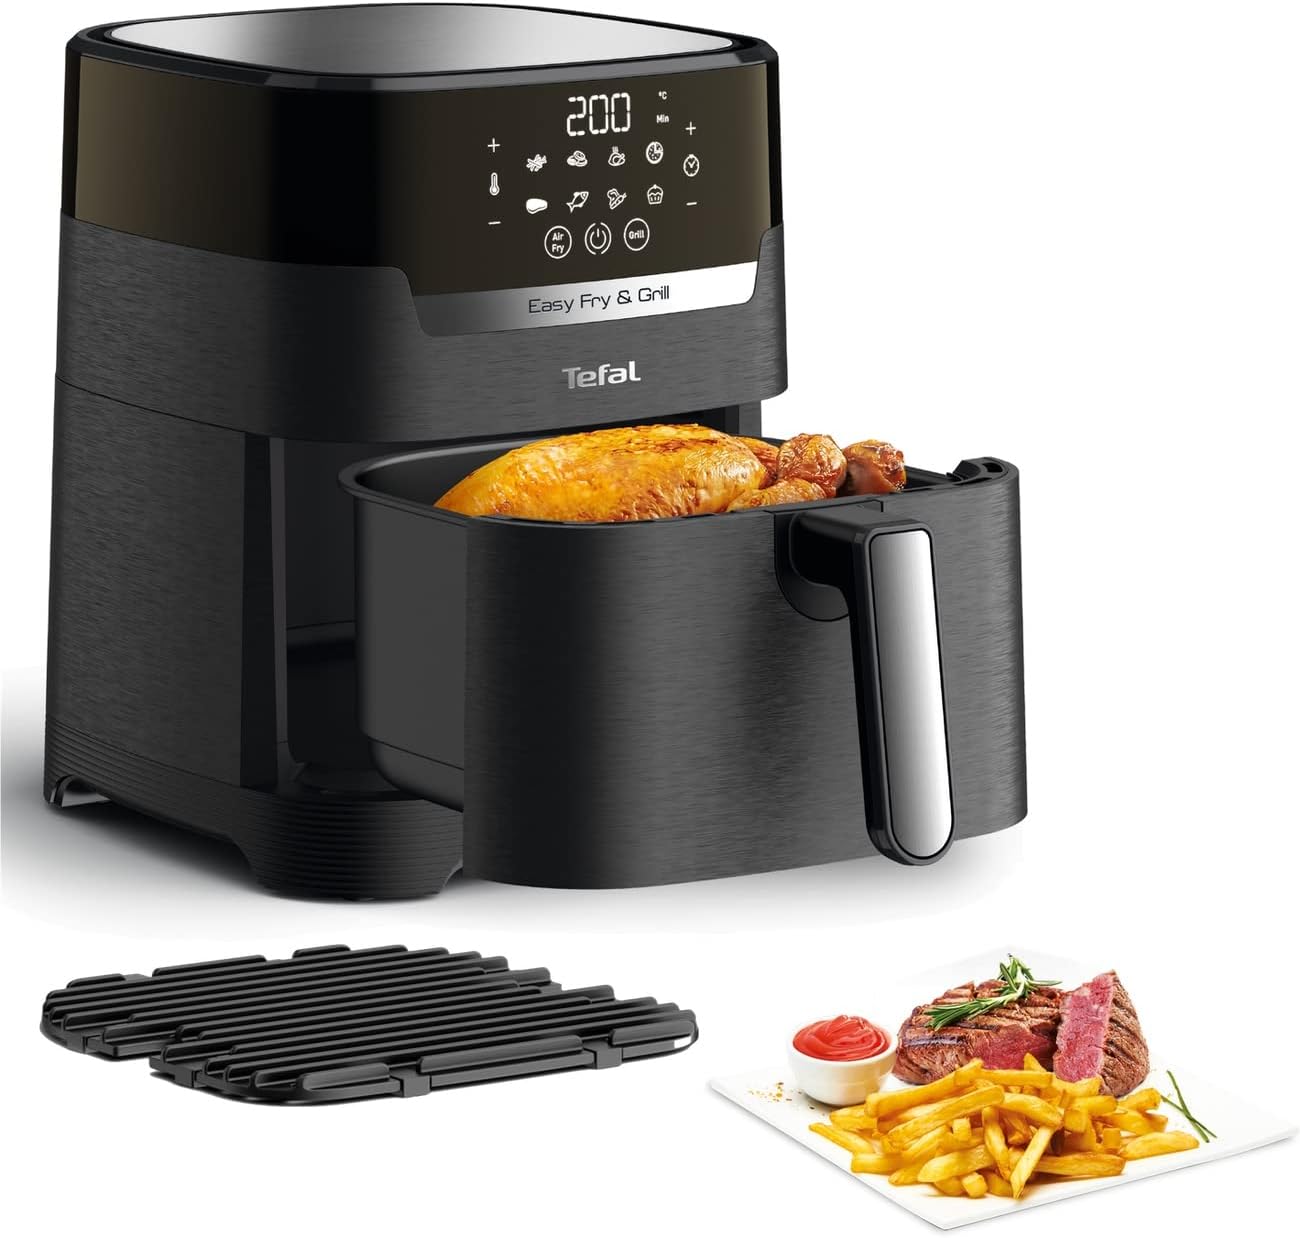 Tefal Fry & Grill Power Hot Air Fryer Fryer + Digital Recipe Book App, Die-Cast Aluminium Grill Plate, 2-in-1 Hot Air Fryer and Grill, Touch Display, 4.2 L, 8 Auto Programmes